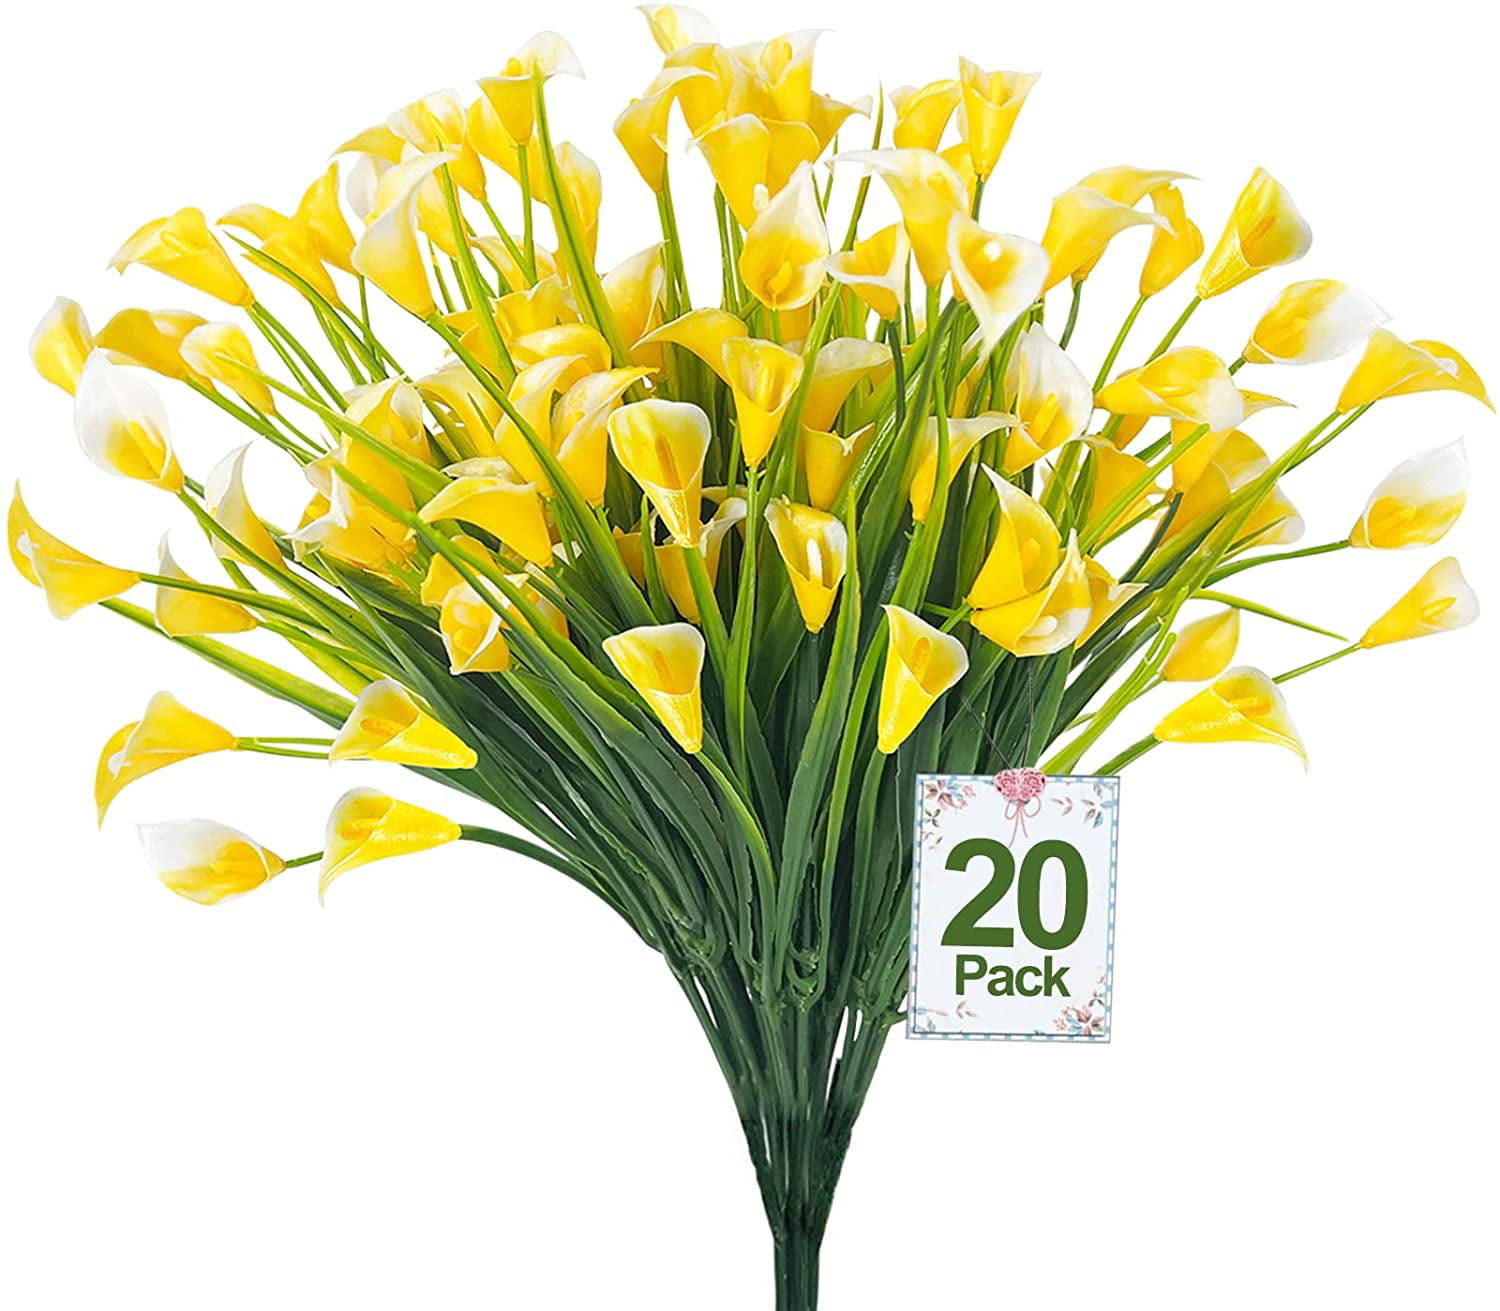 Plastic Artificial Flowers Fake Plants Grass Garden Lily Calla Daffodil Outdoor 